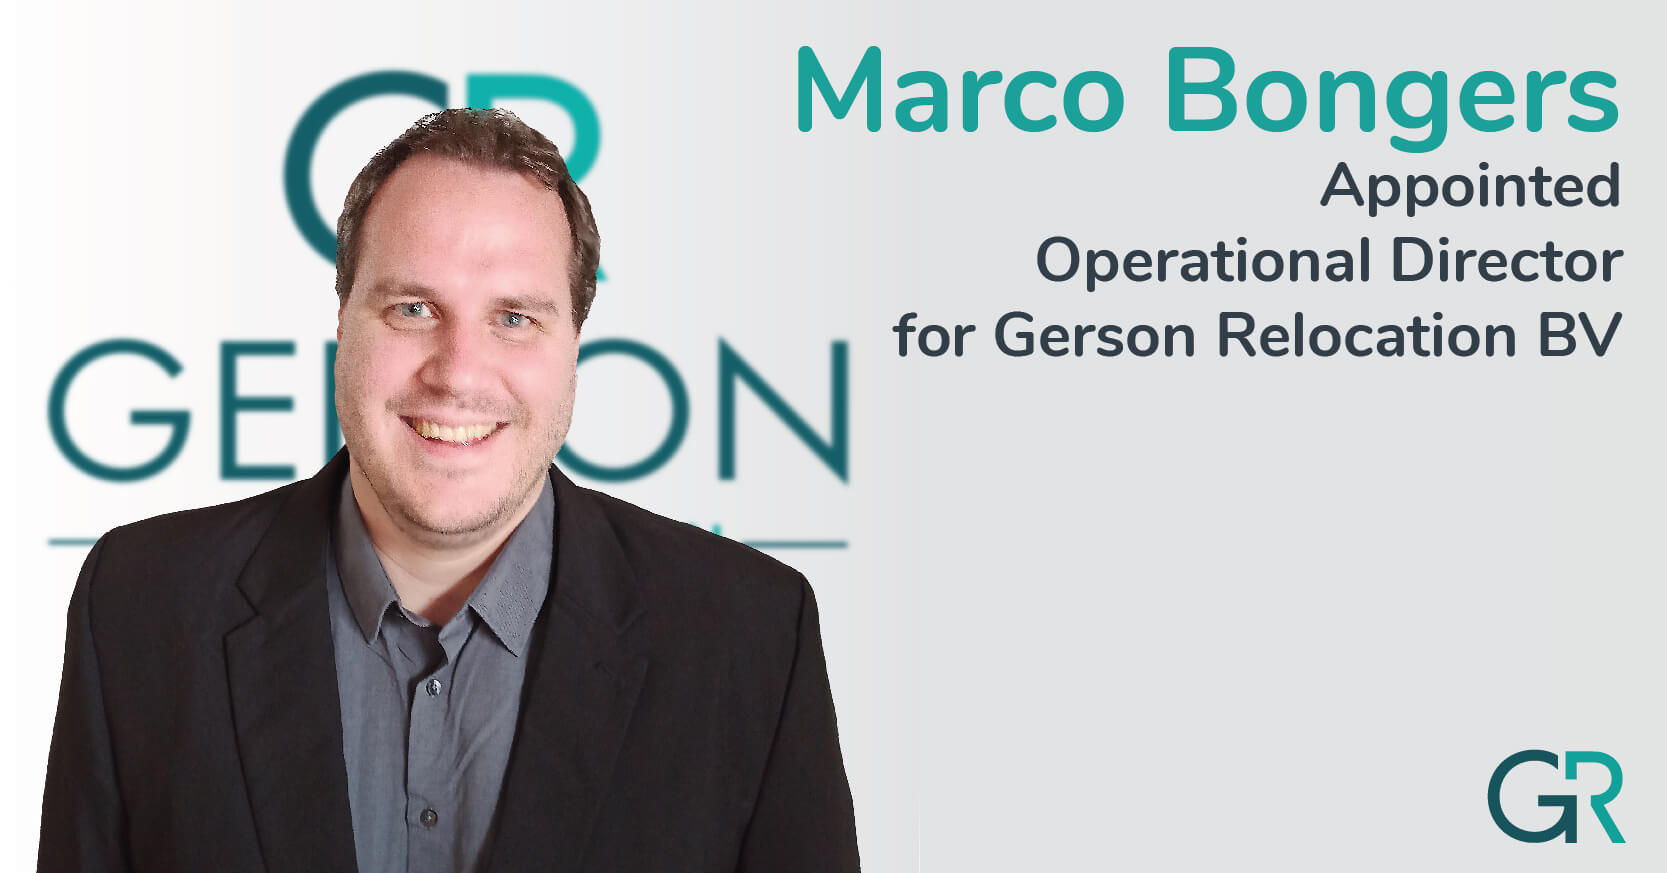 Marco Bongers Appointed As Operational Director Of Gerson Relocation BV